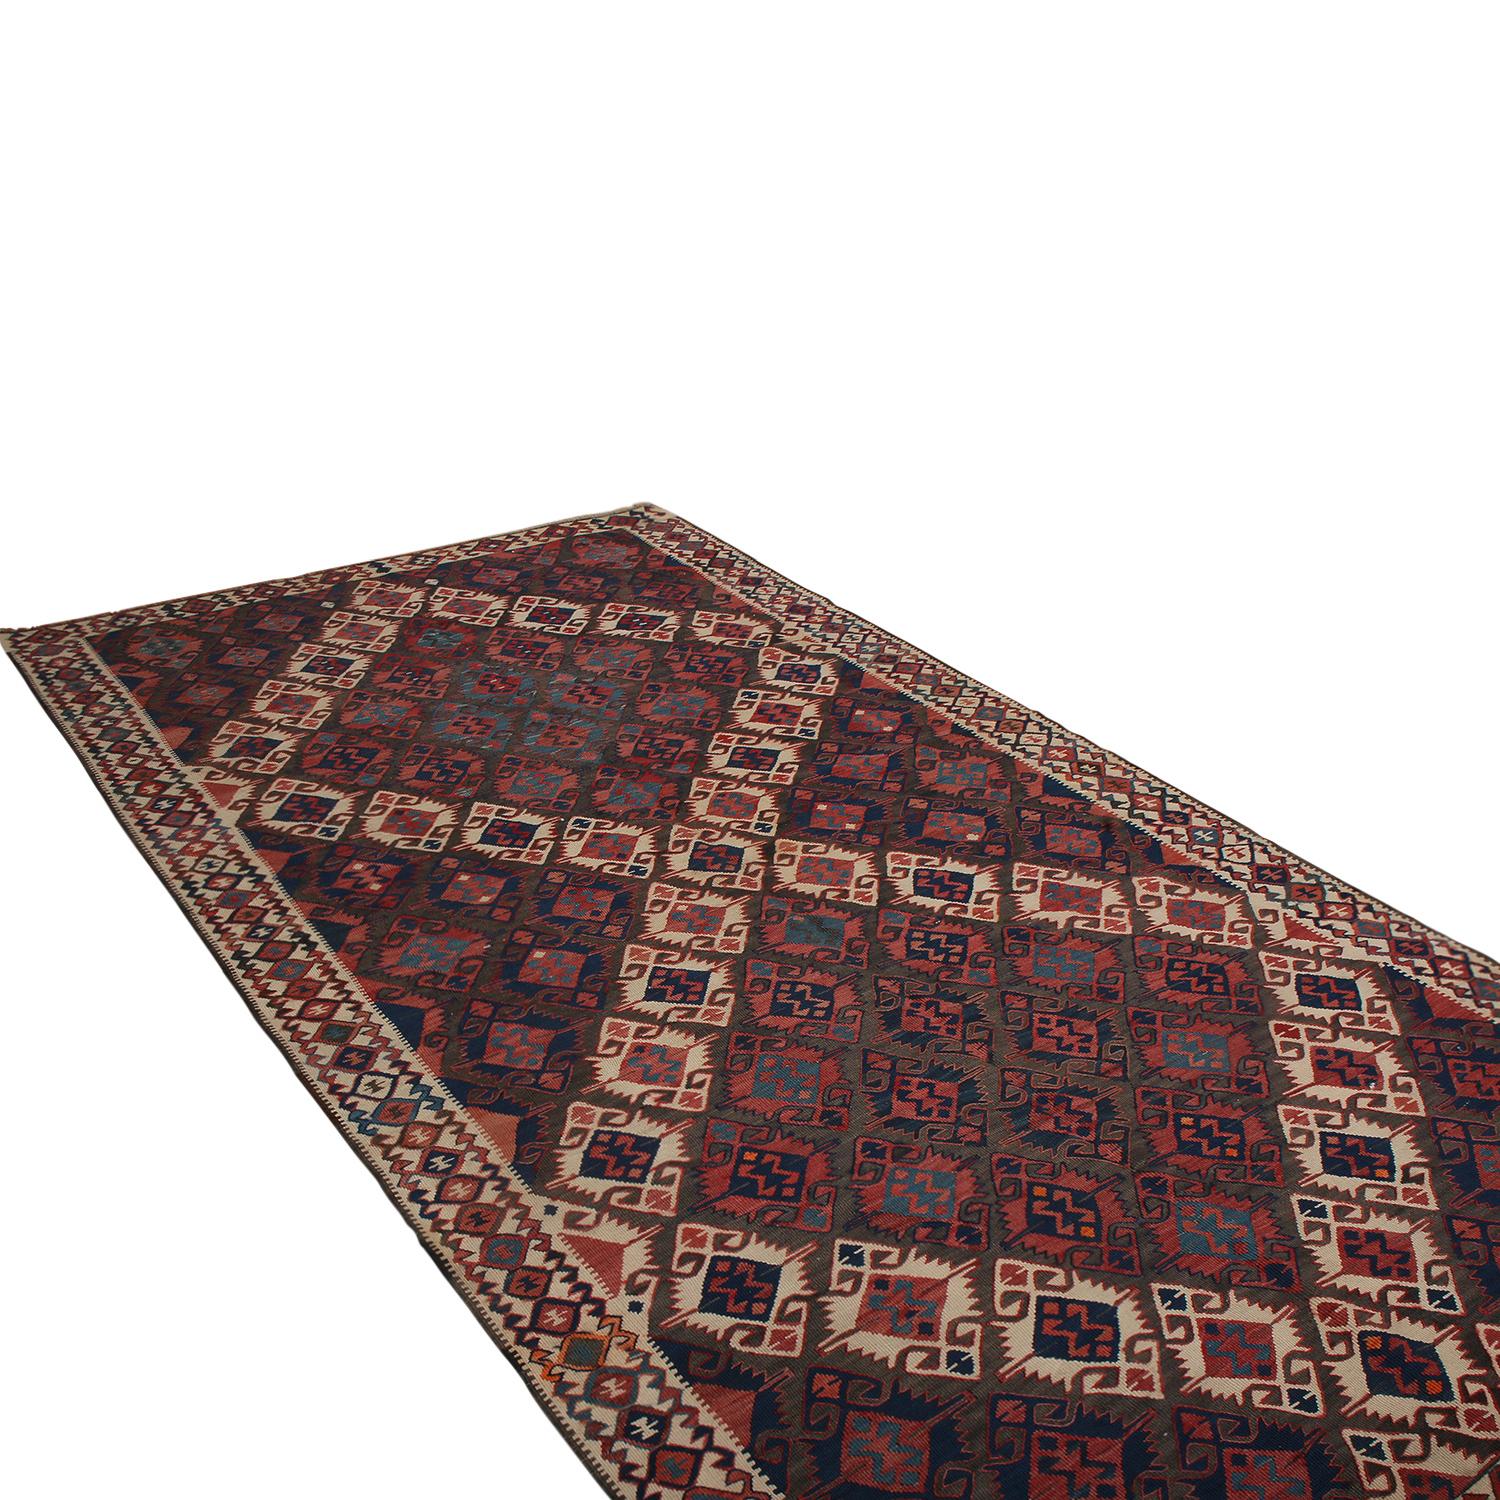 Flat-woven in Turkey originating between 1950-1960, this vintage midcentury geometric Kilim hails from the city of Van, enjoying a gripping tribal contrast of its rich burgundy red and beige-brown hues in its field and border, both accented by